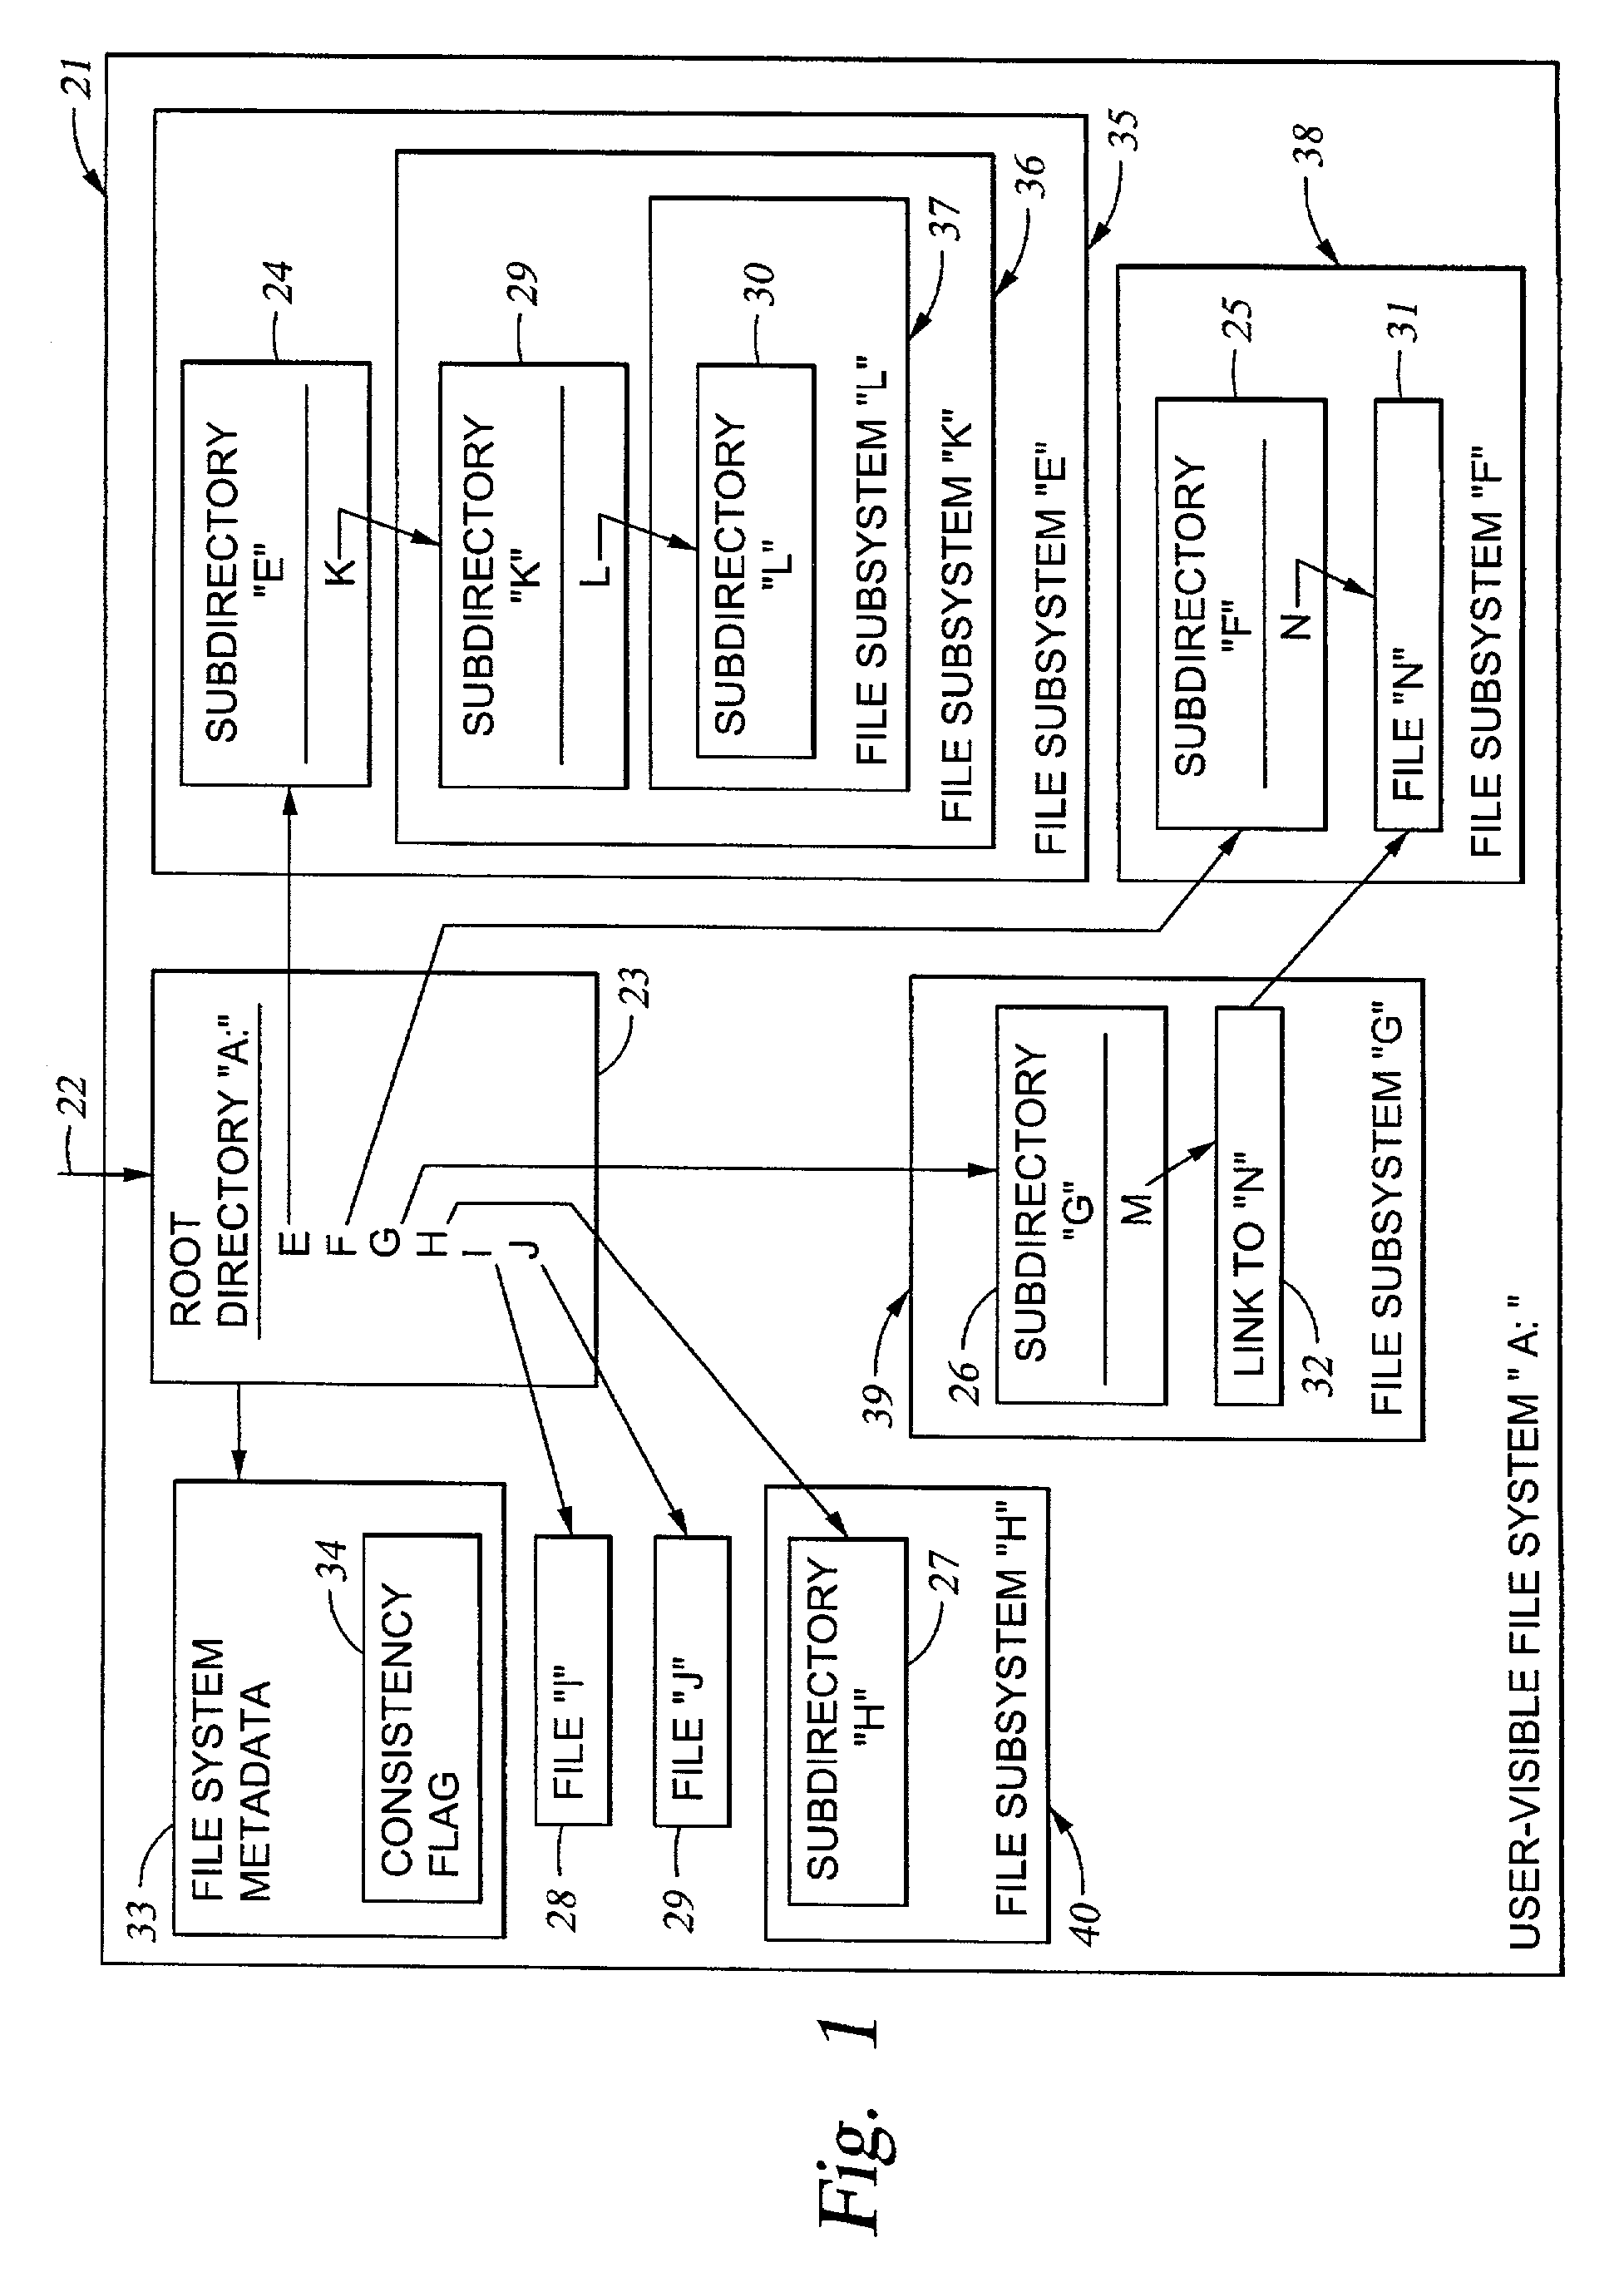 Cluster meta file system of file system cells managed by respective data movers of a network file server